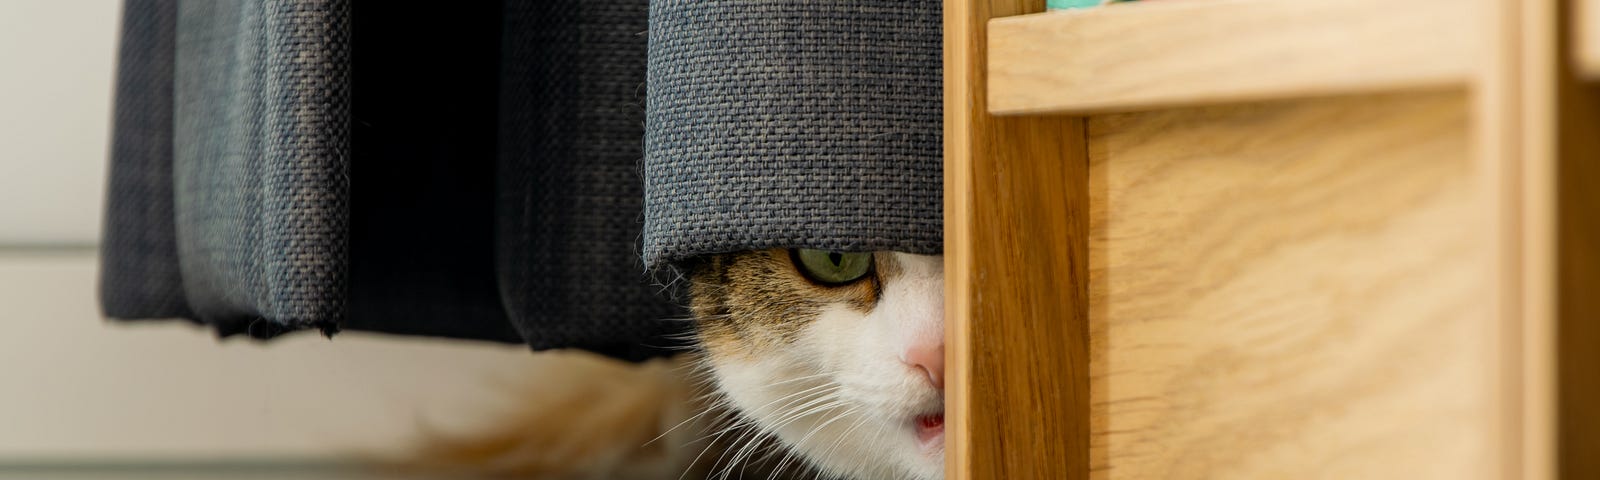 Cat behind a piece of furniture, peeking out from under a curtain.